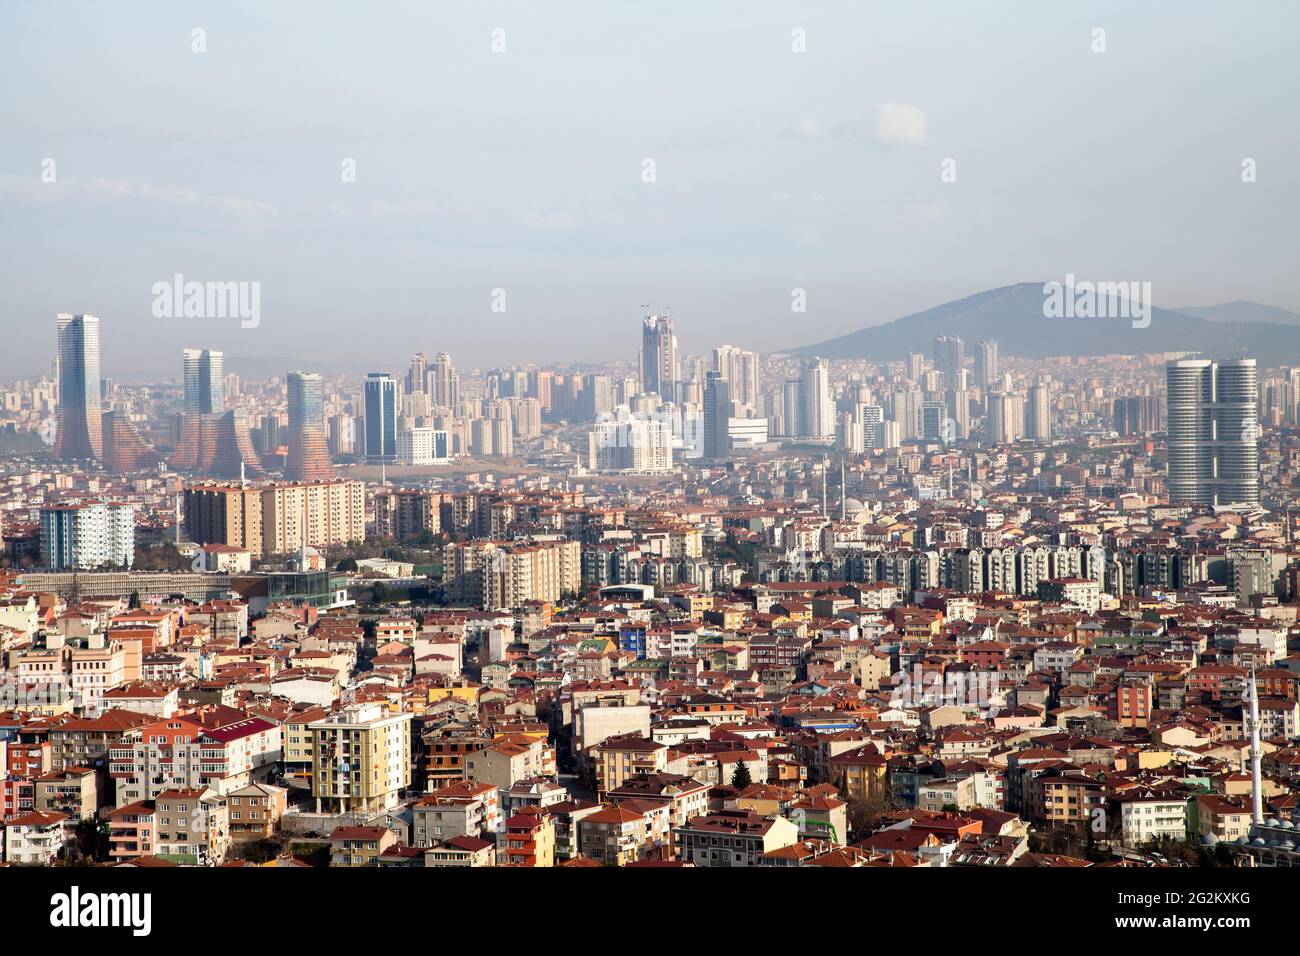 Istanbul,Turkey - 02-25-2013:Buildings, skyscrapers and Istanbul city skyline Stock Photo